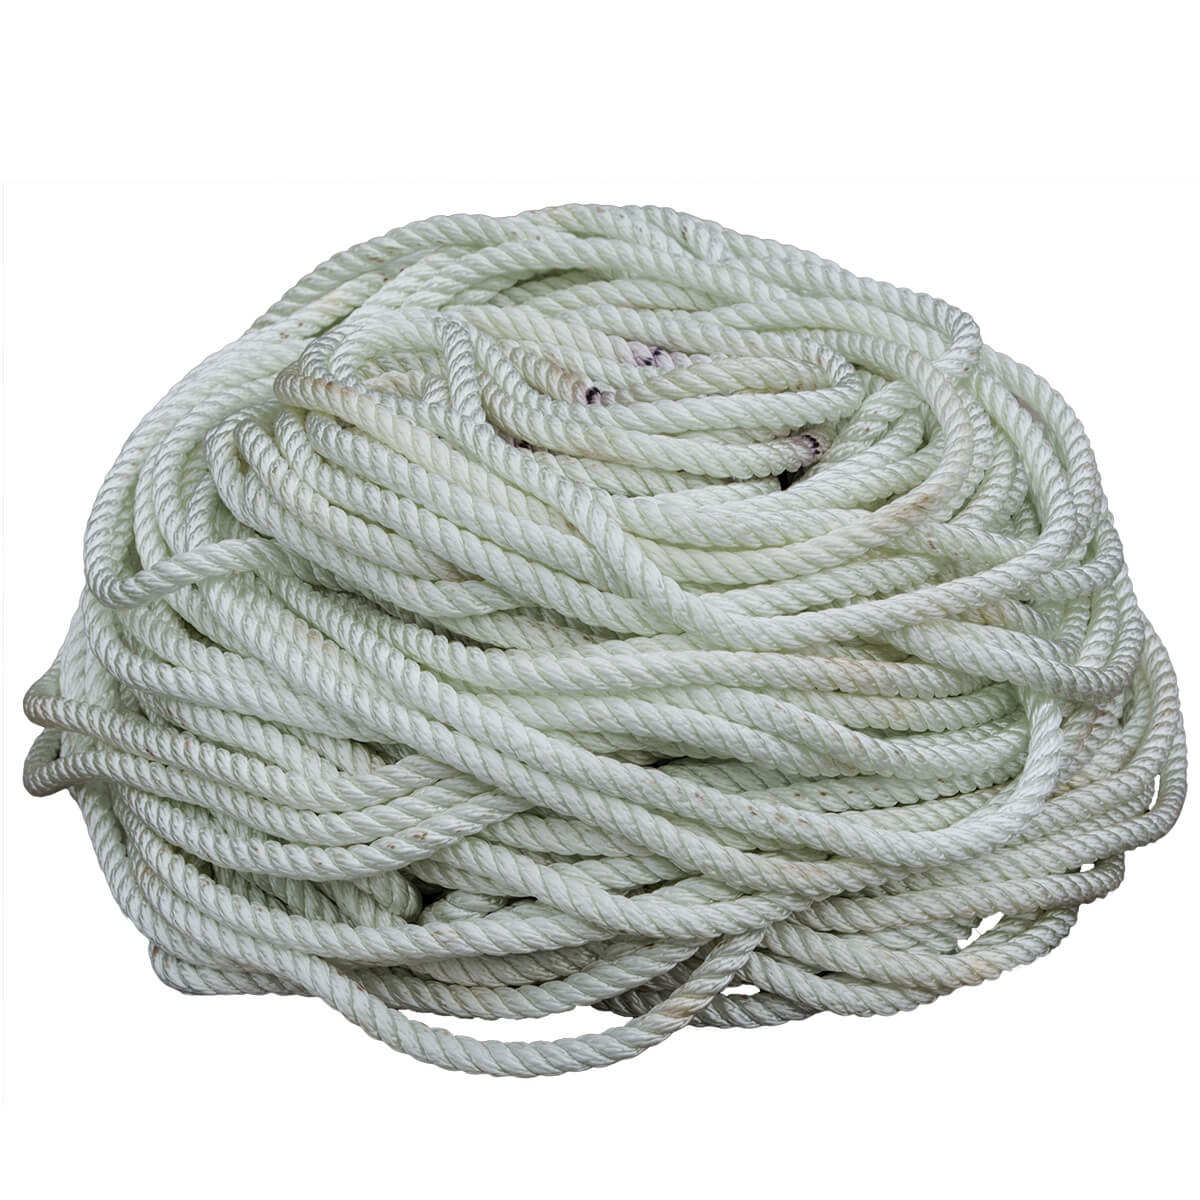 Nylon rope value back 3/8 inch from Coleman's military surplus for tent camping accessories